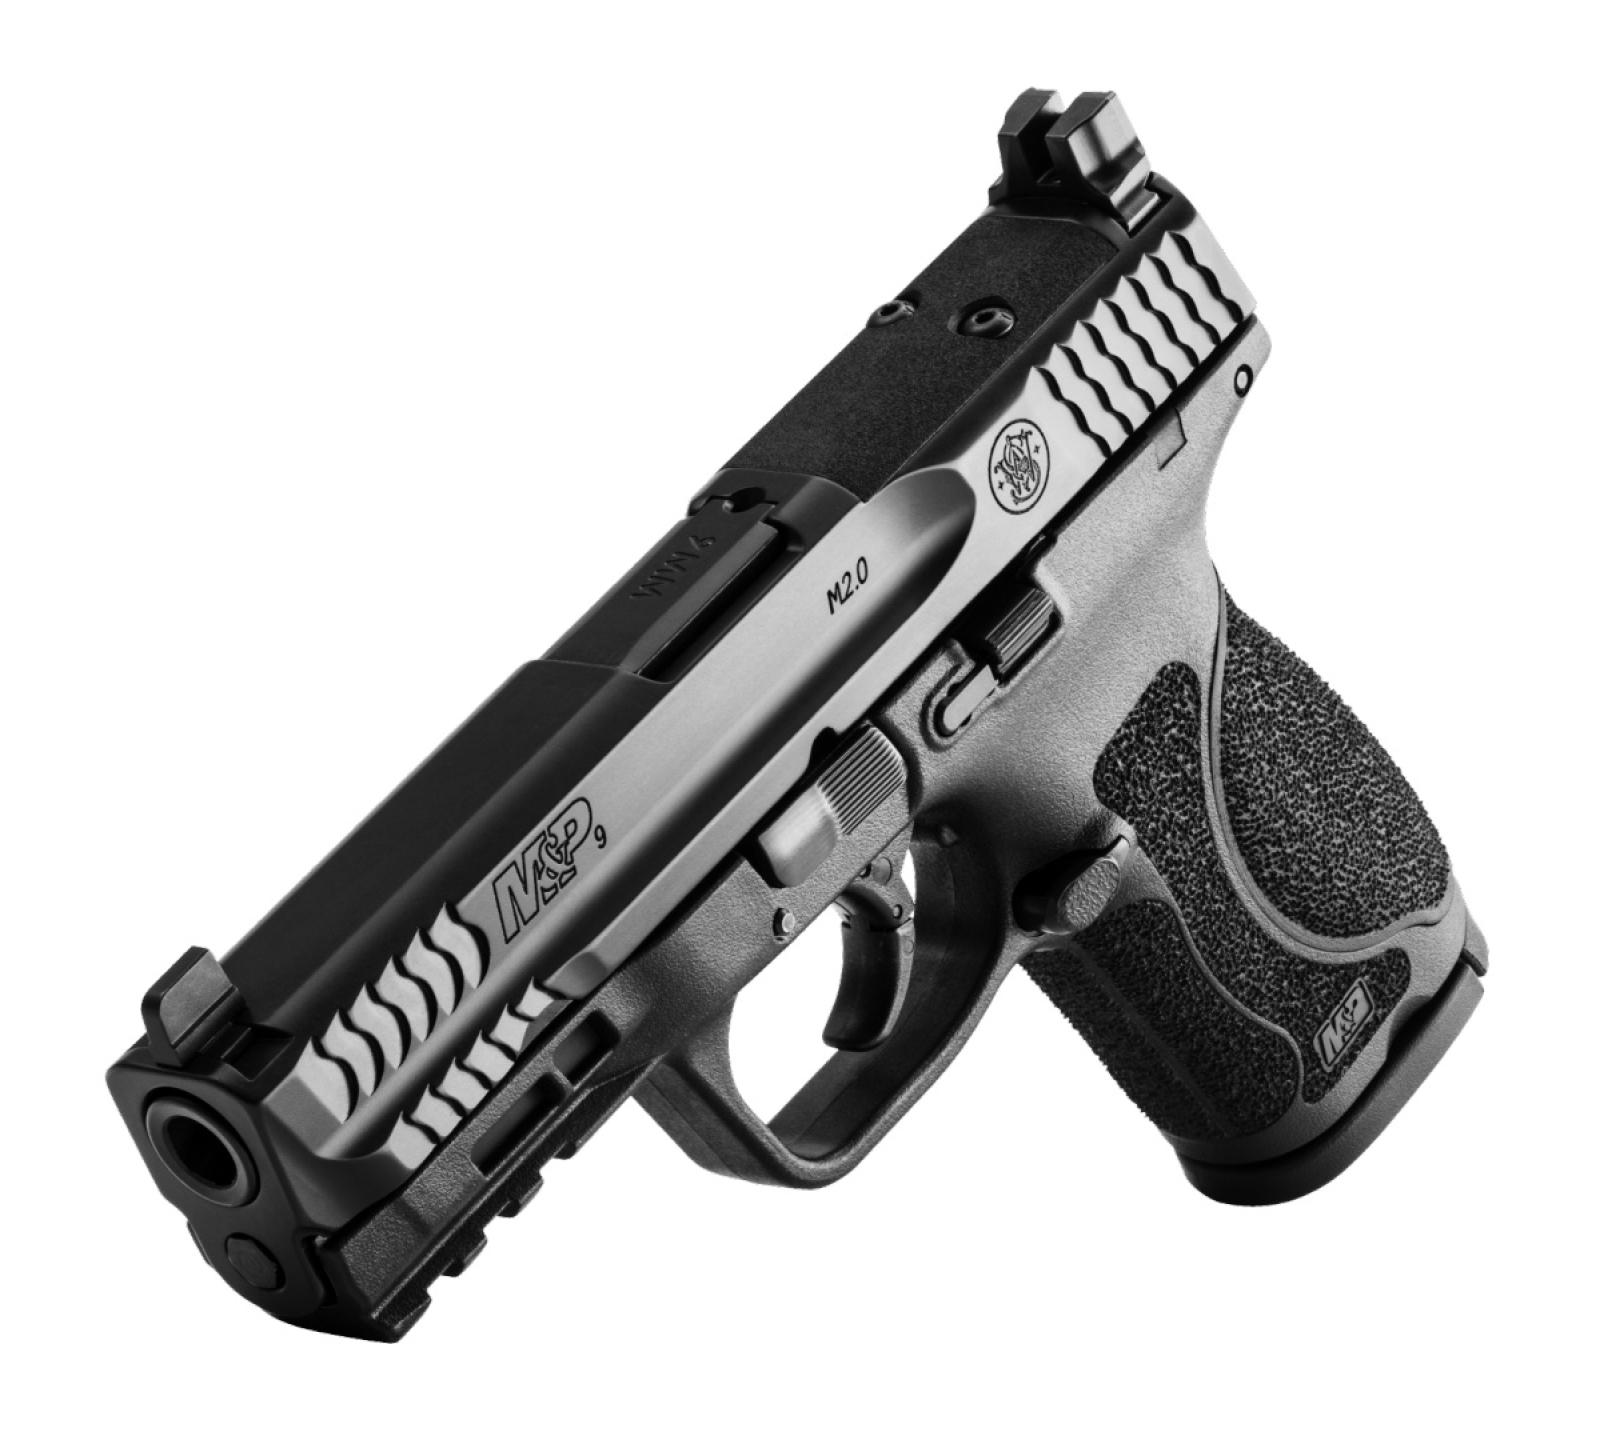 Smith & Wesson M&P M2.0 9mm 4" Compact